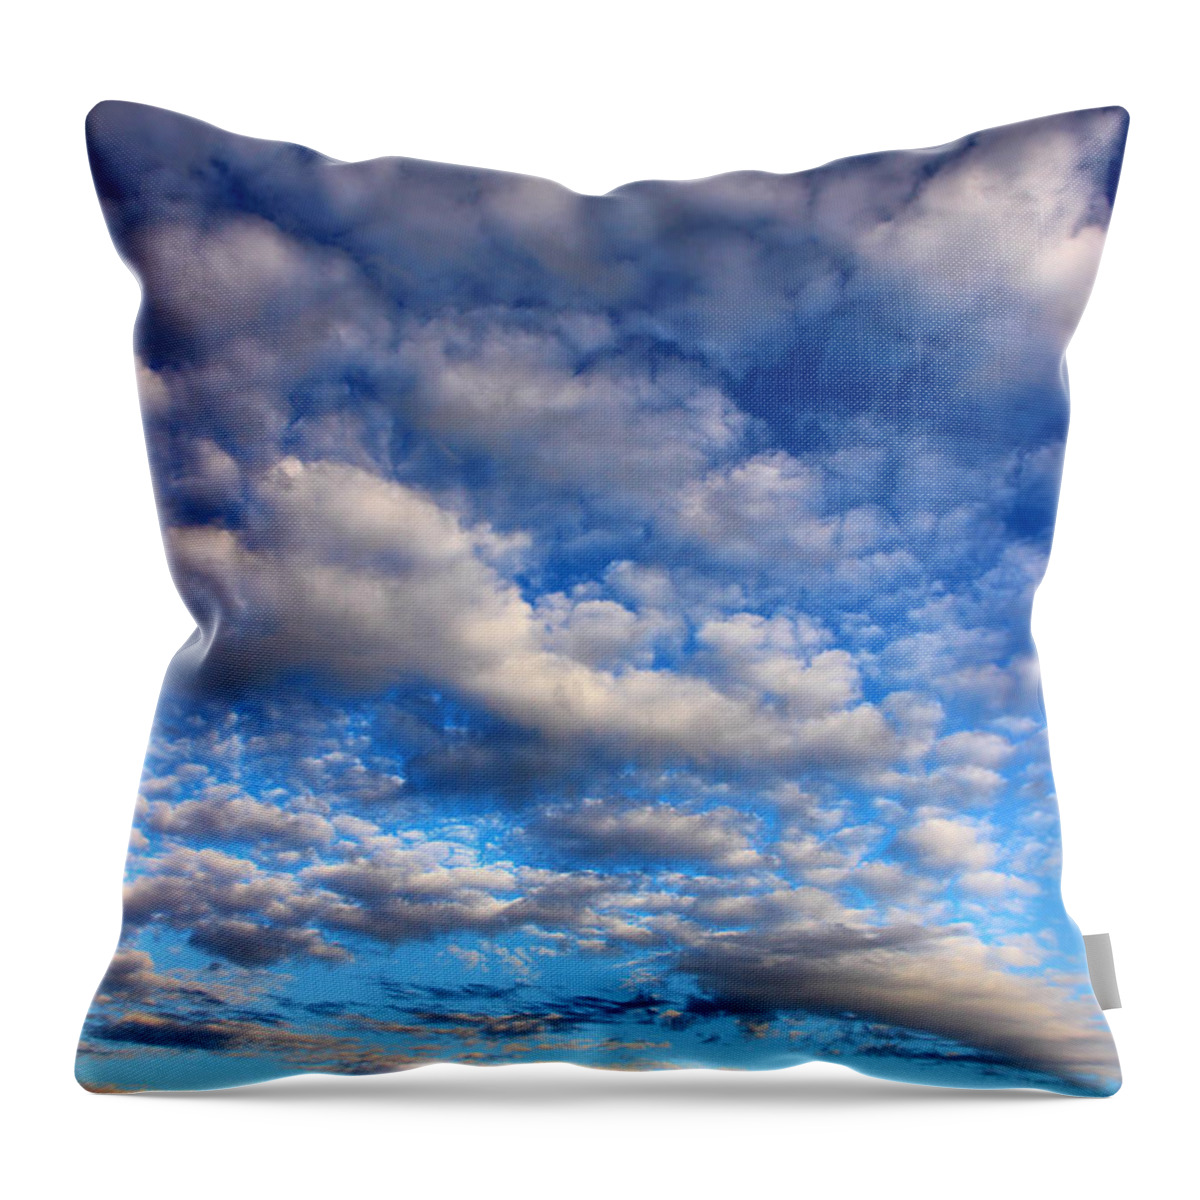 Smoky Mountains Dusk Throw Pillow featuring the photograph Influence Of Dusk by Michael Eingle